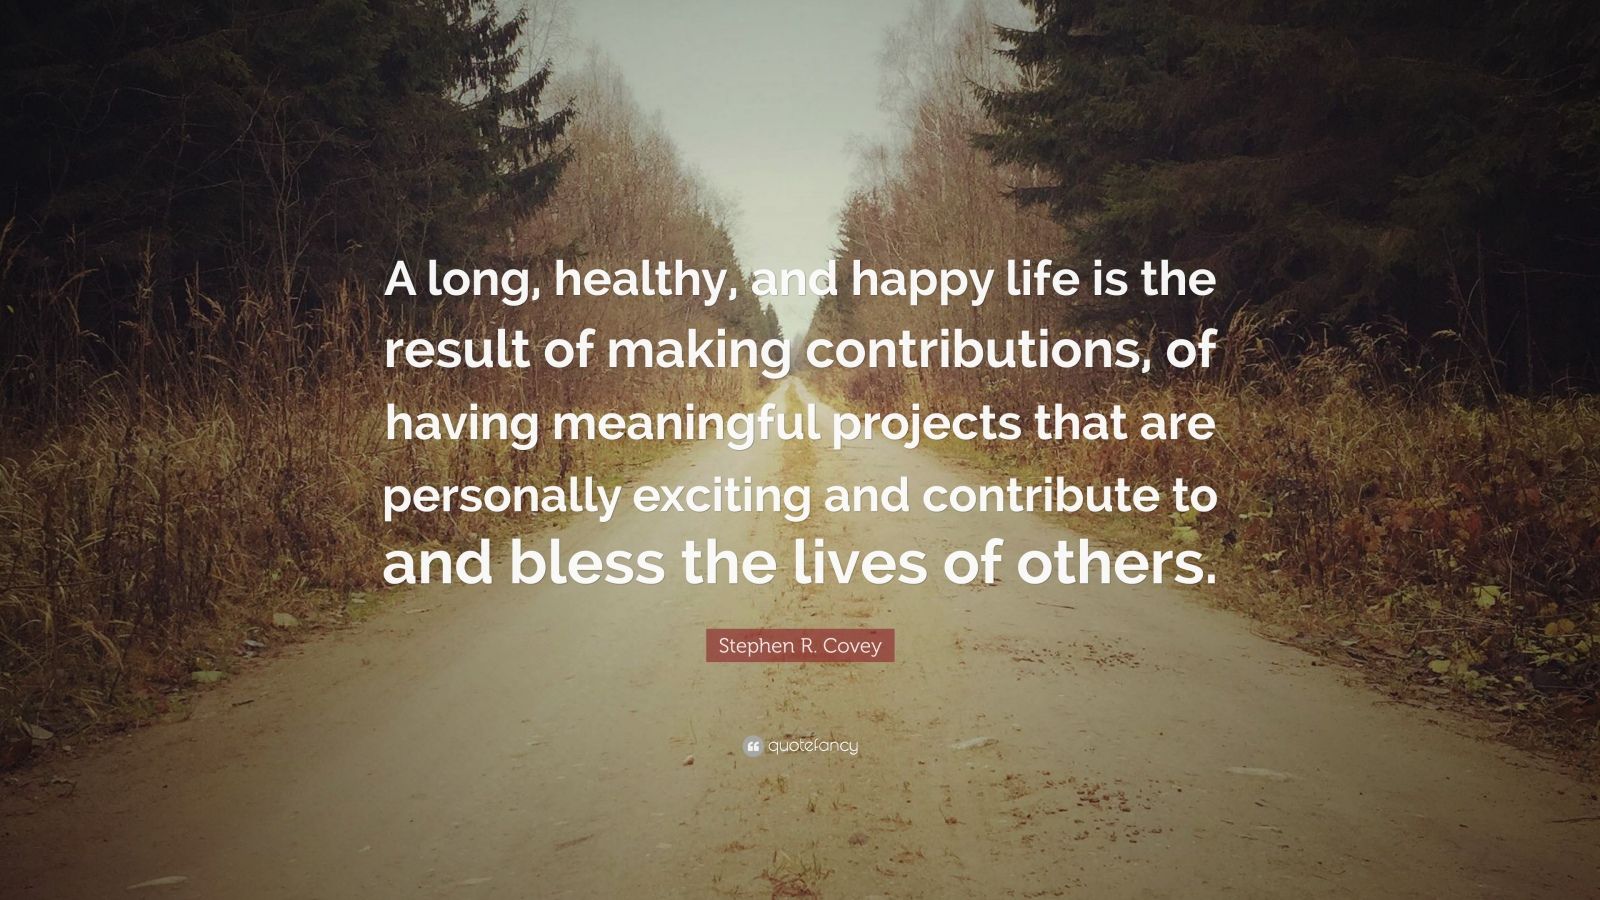 Stephen R. Covey Quote: “A long, healthy, and happy life is the result